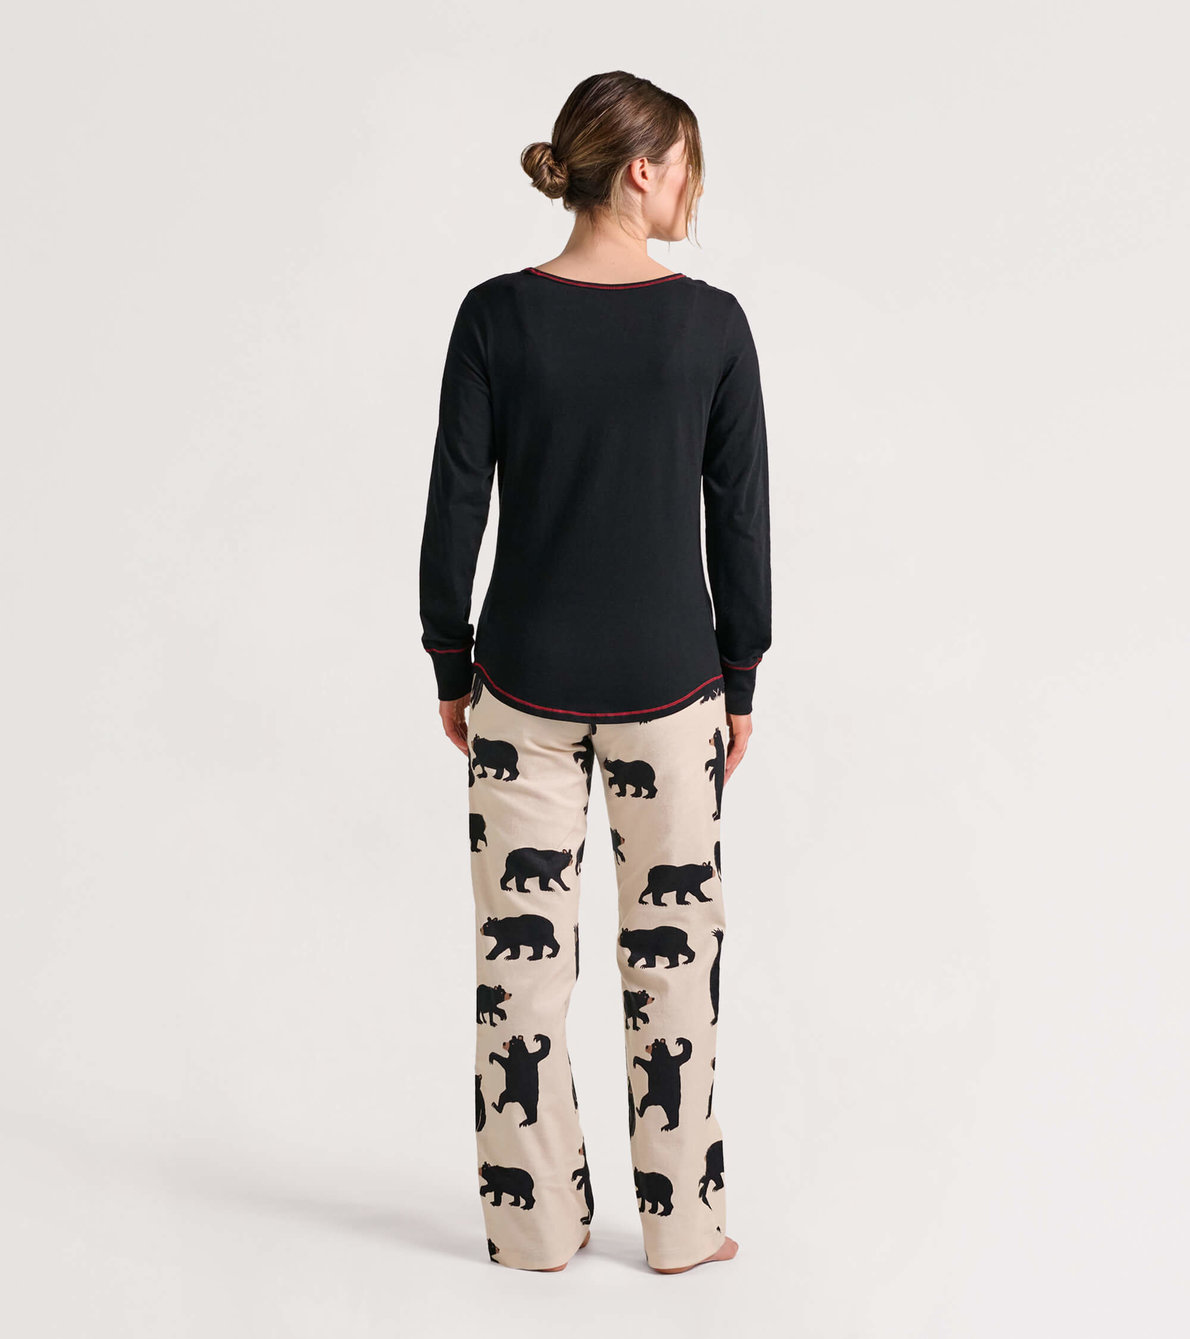 View larger image of Women's Black Bears Flannel Pajama Pants